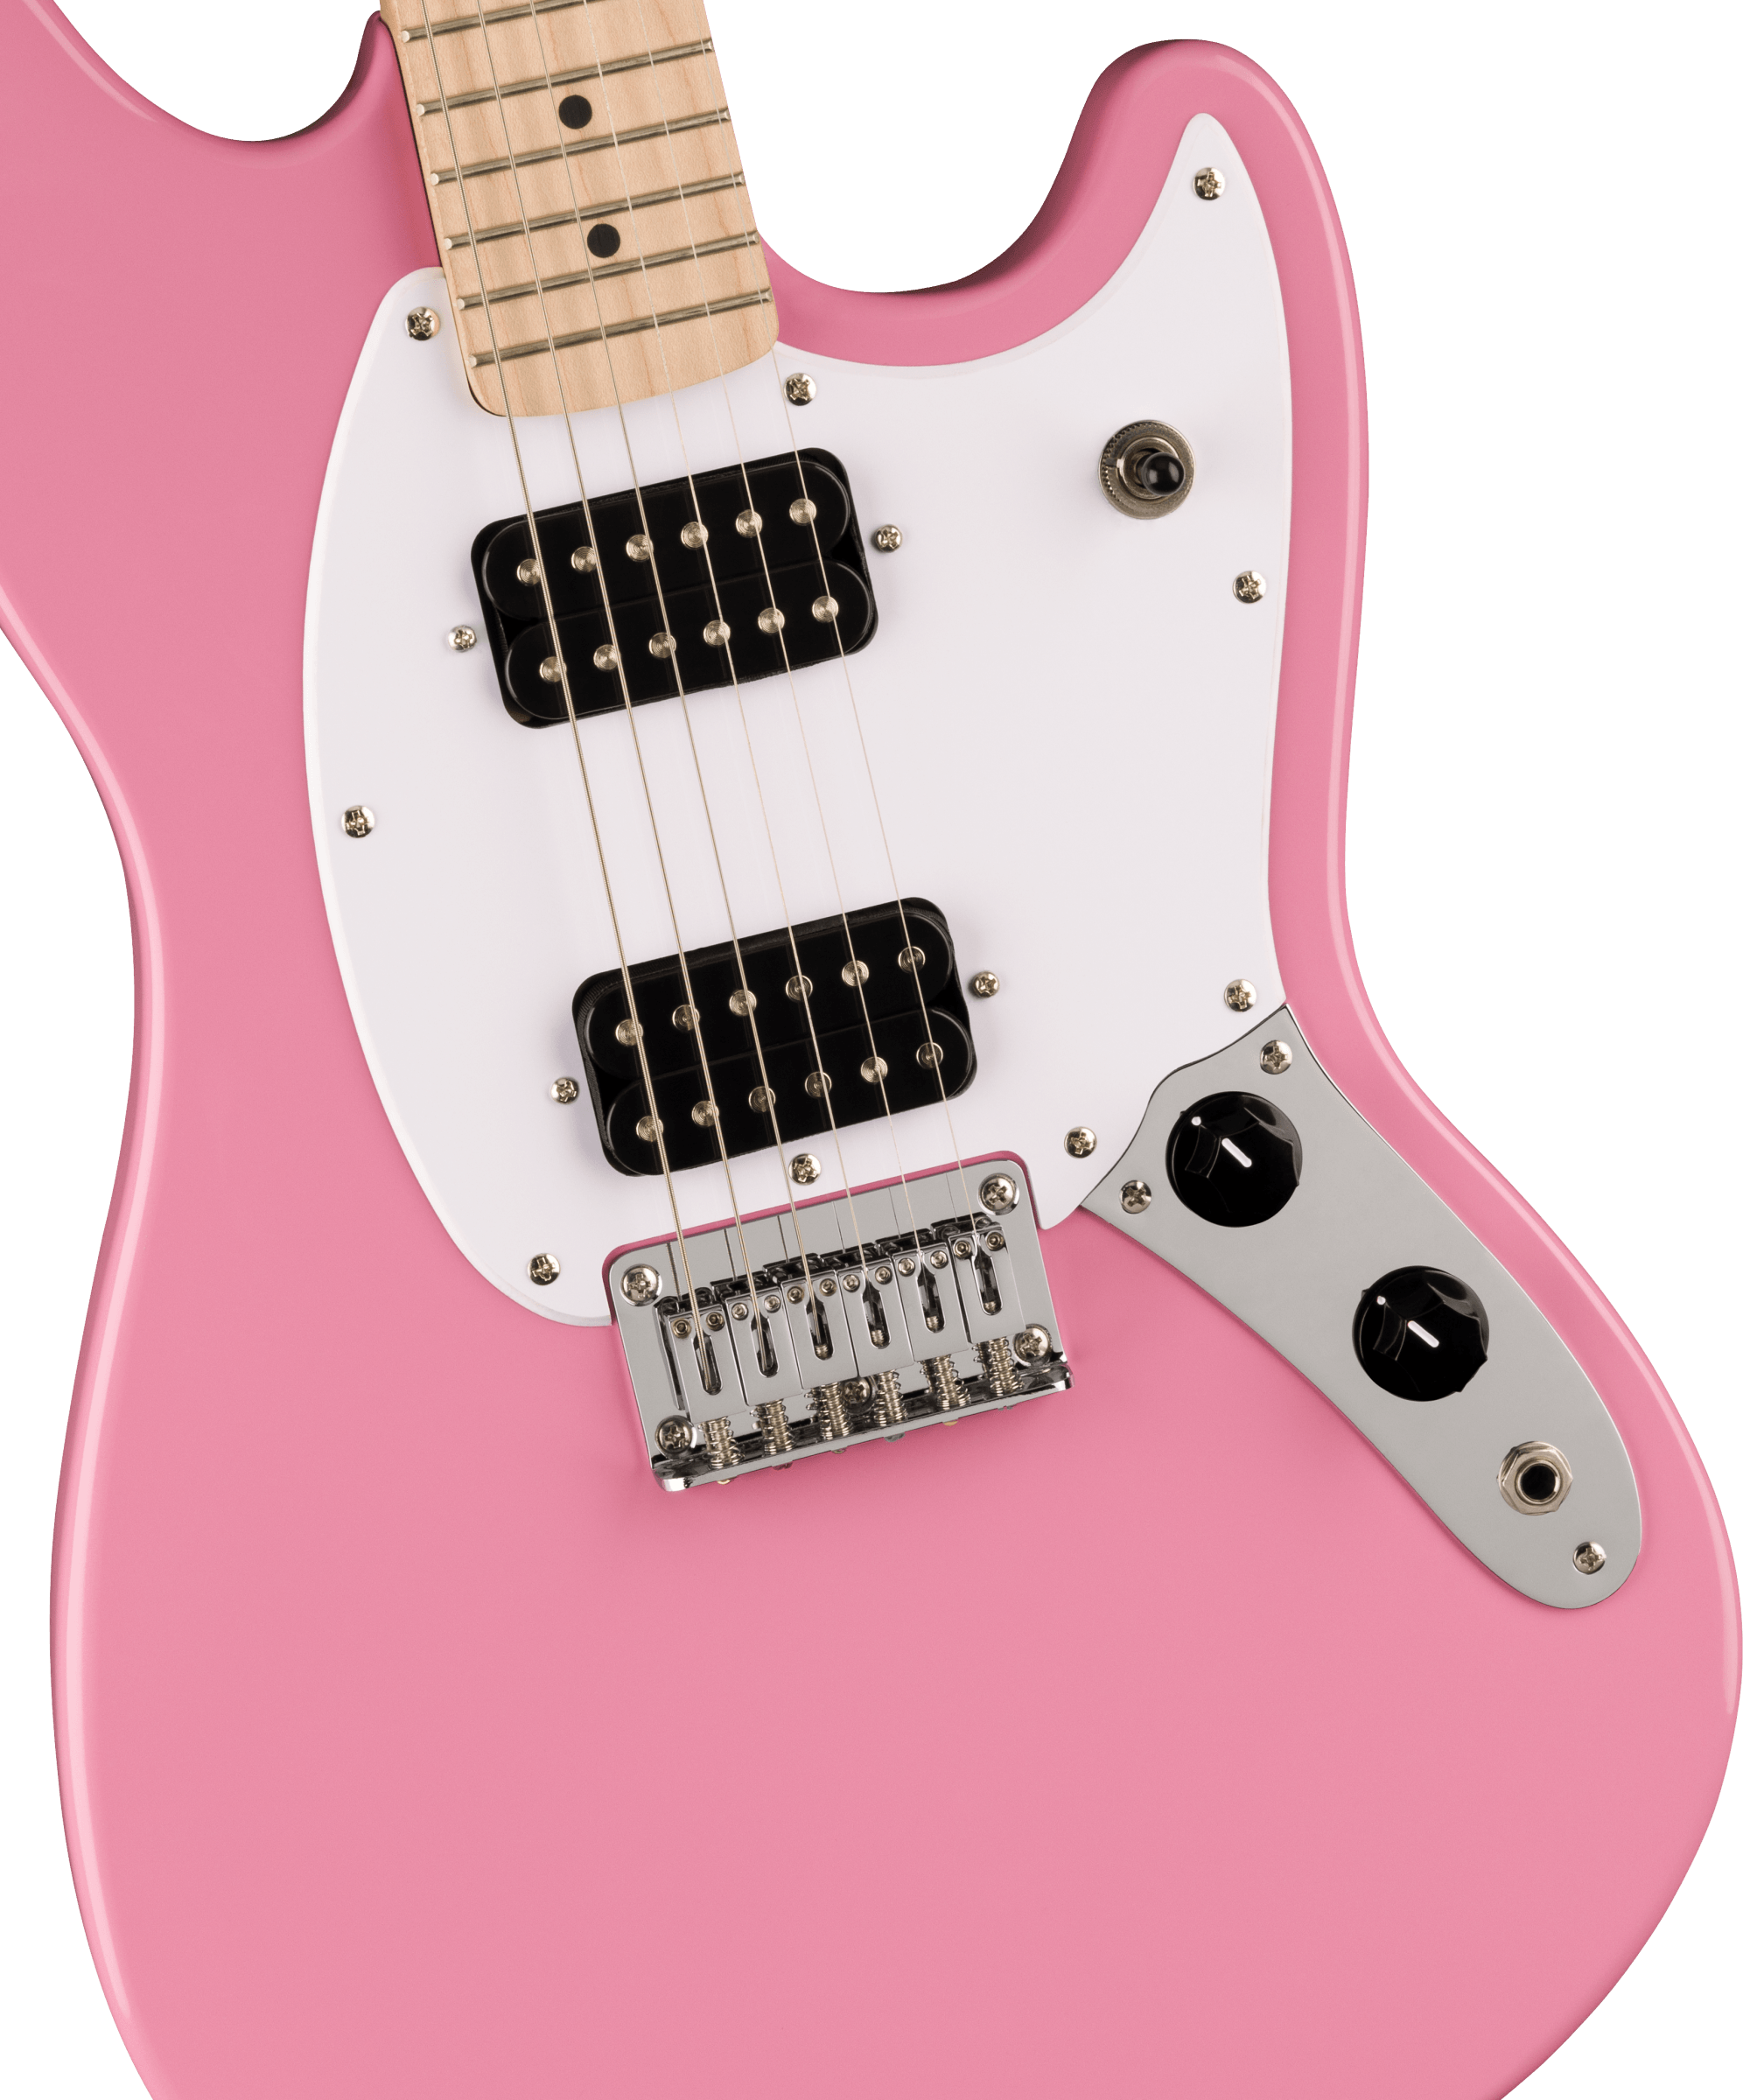 Squier Sonic Mustang HH in Flash Pink